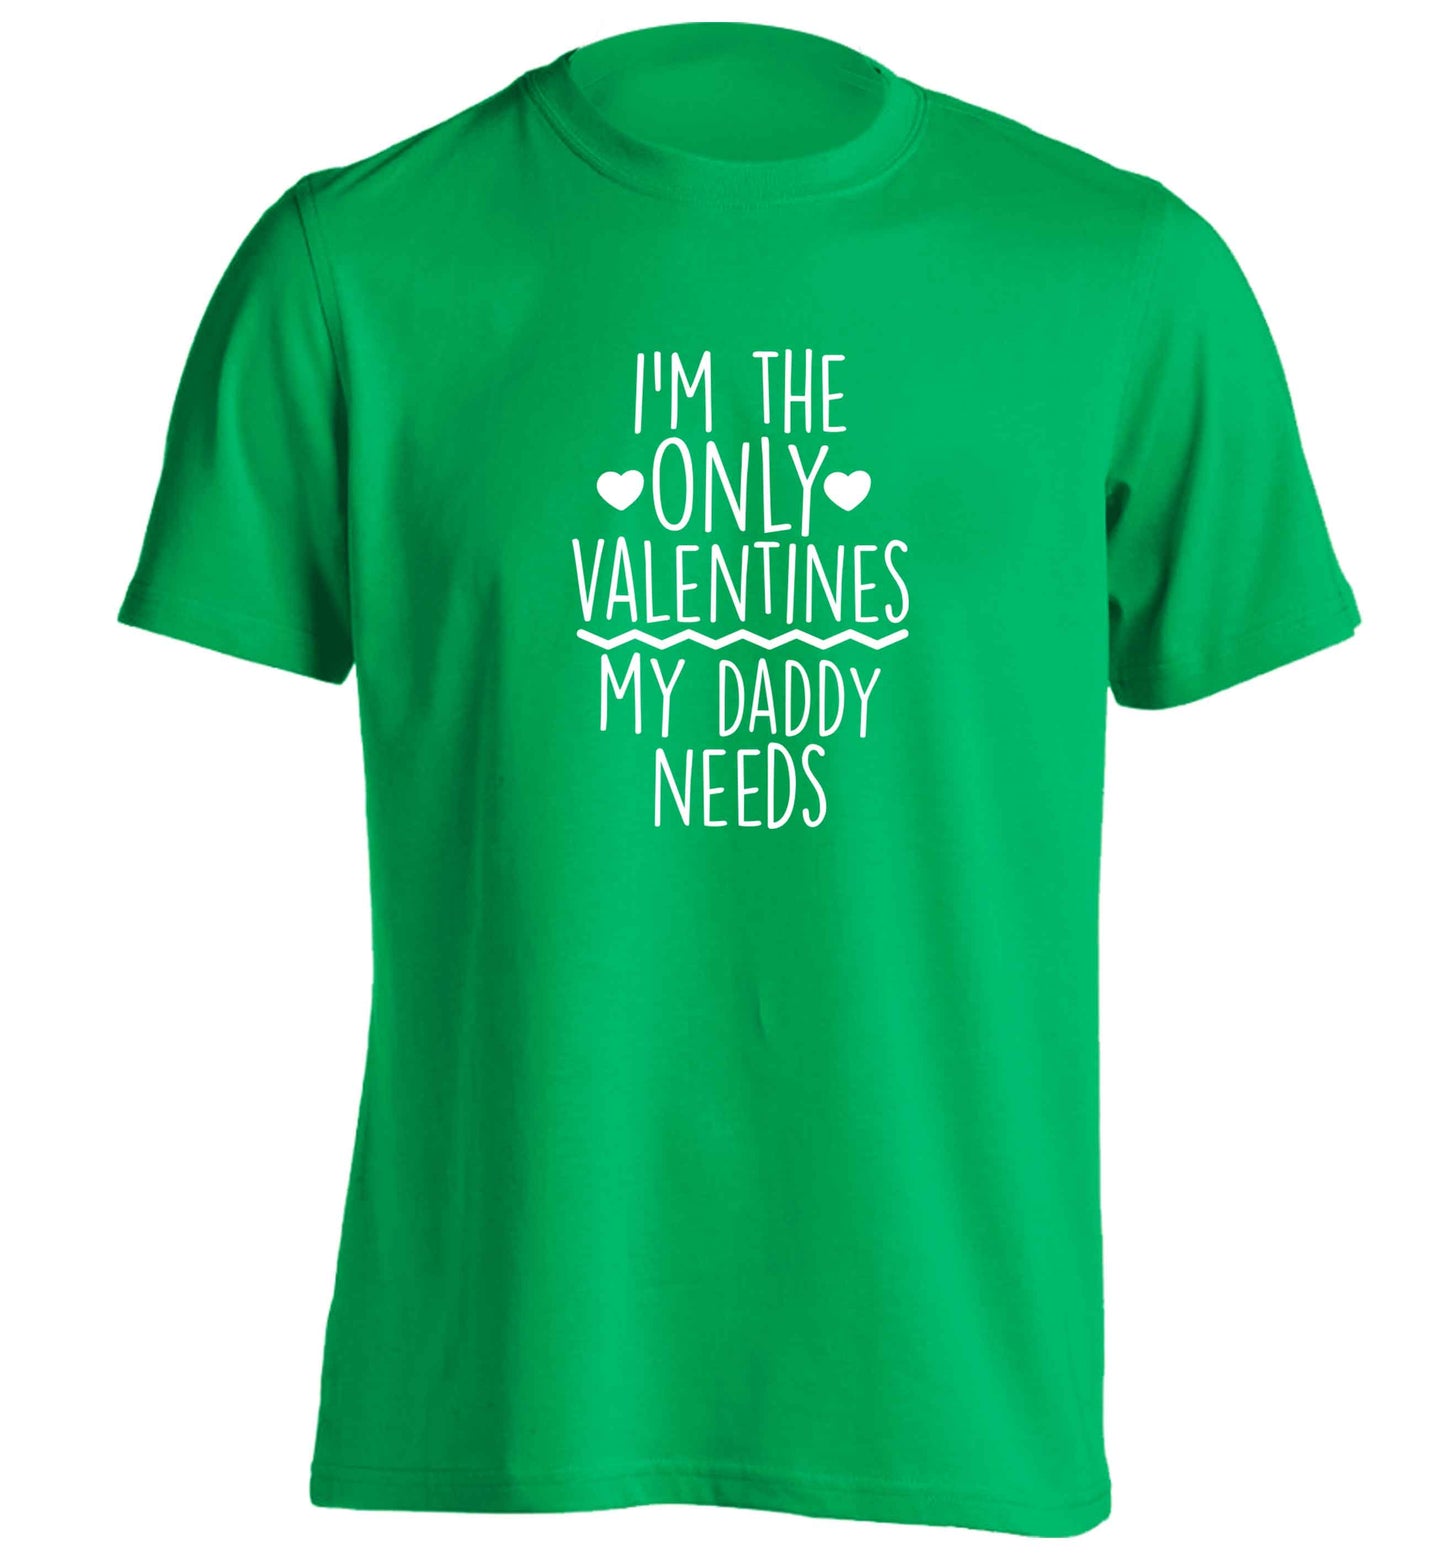 I'm the only valentines my daddy needs adults unisex green Tshirt 2XL